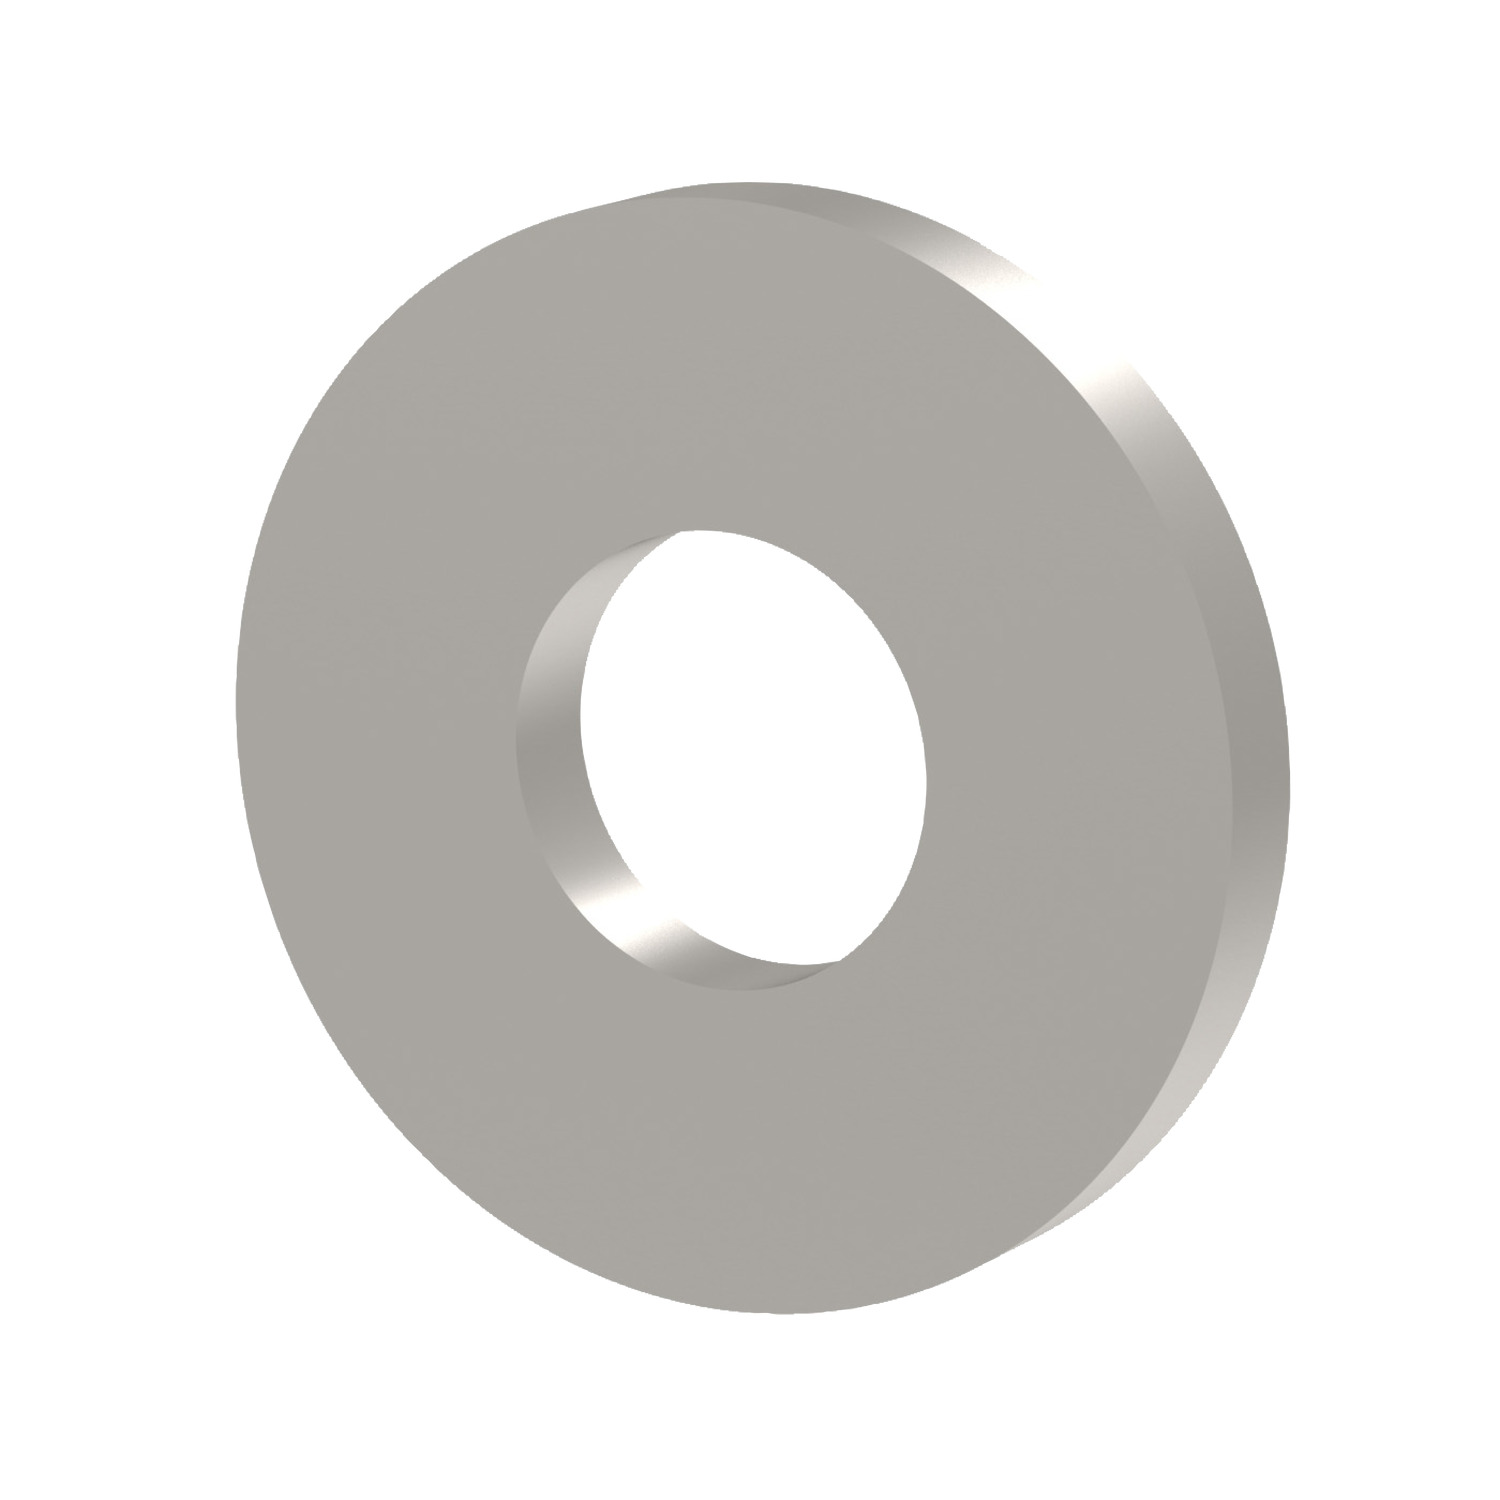 P0330.100-A2 Form A Flat Washer  DIN 125A M10 A2 s/s .